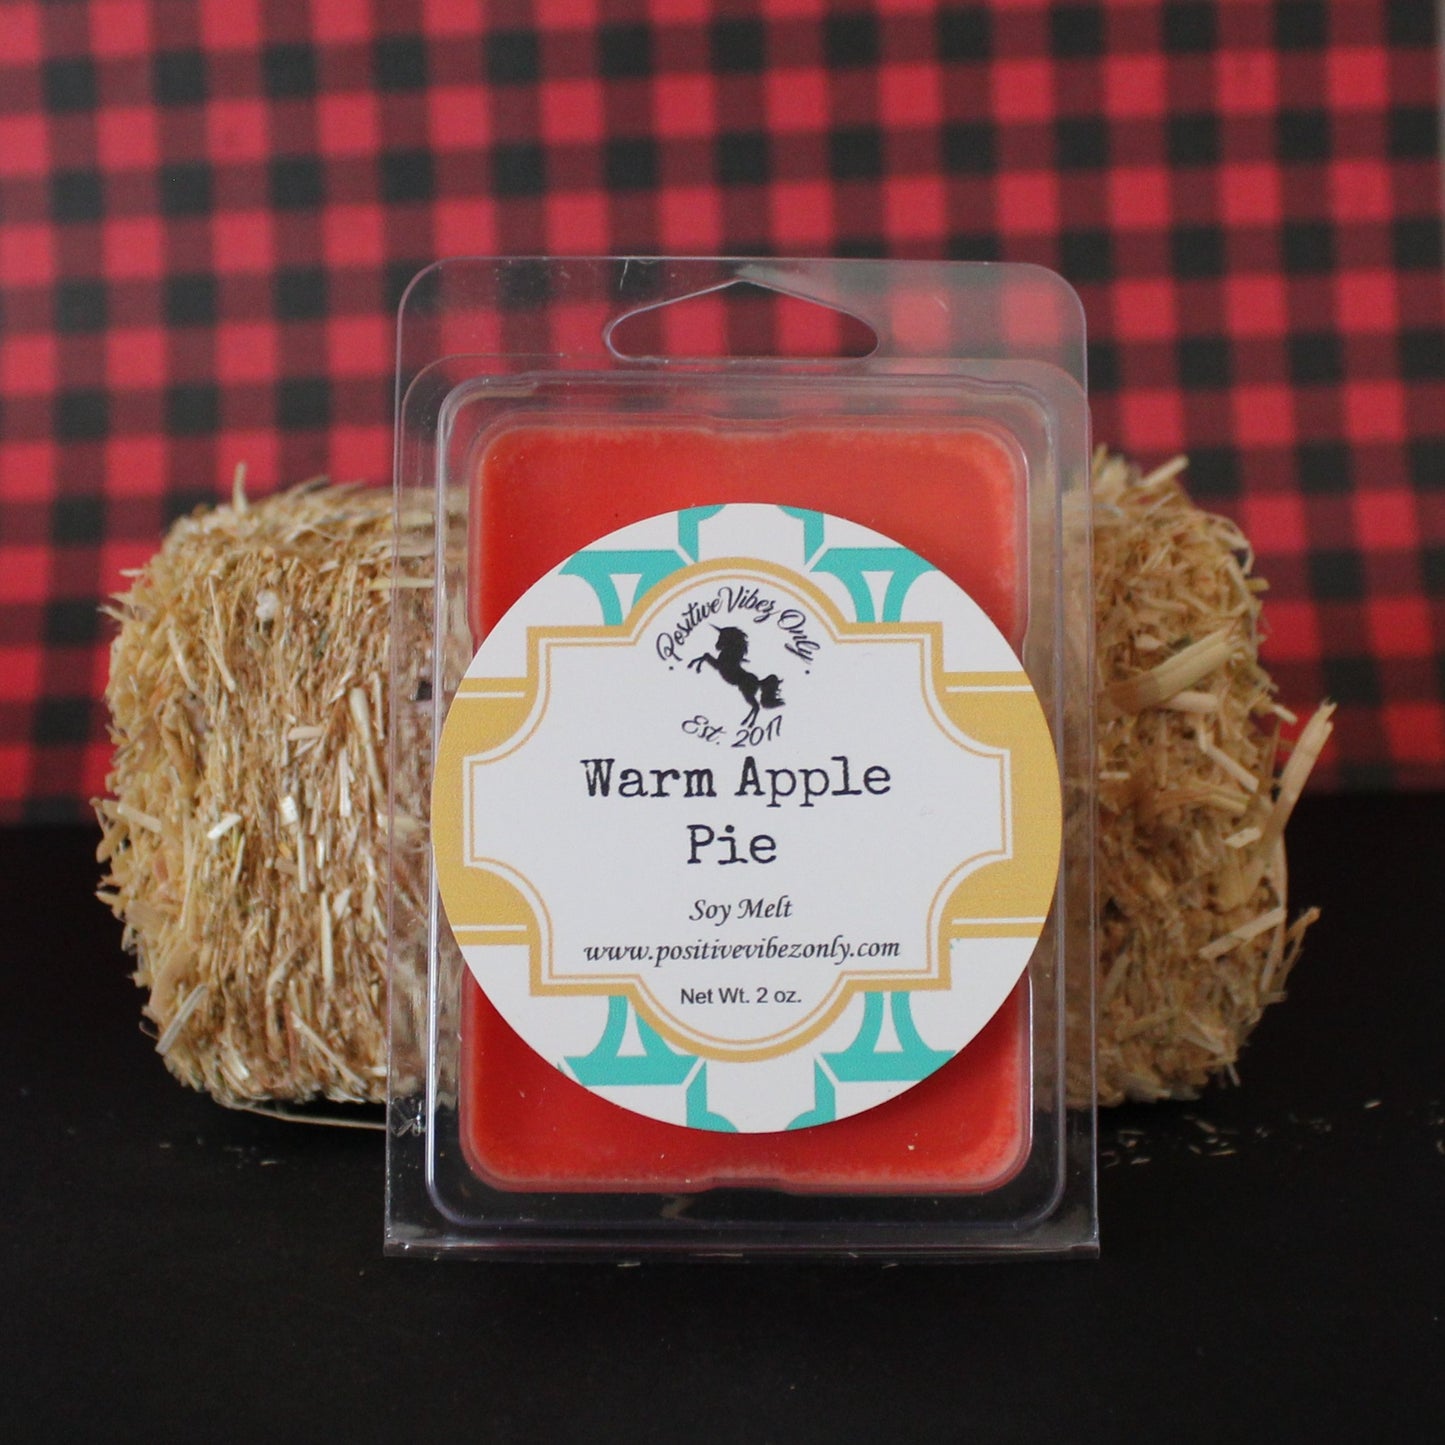 Warm Apple Pie Fall Scented Candle